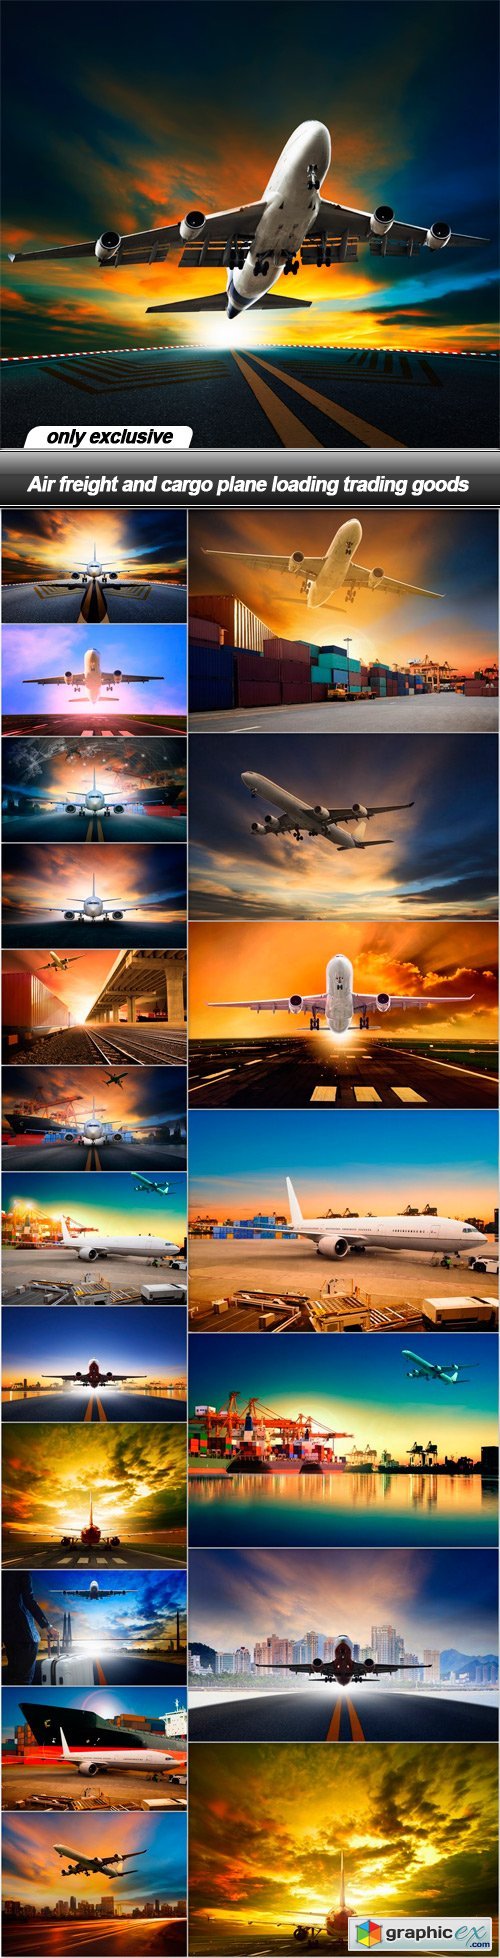 Air freight and cargo plane loading trading goods - 20 UHQ JPEG